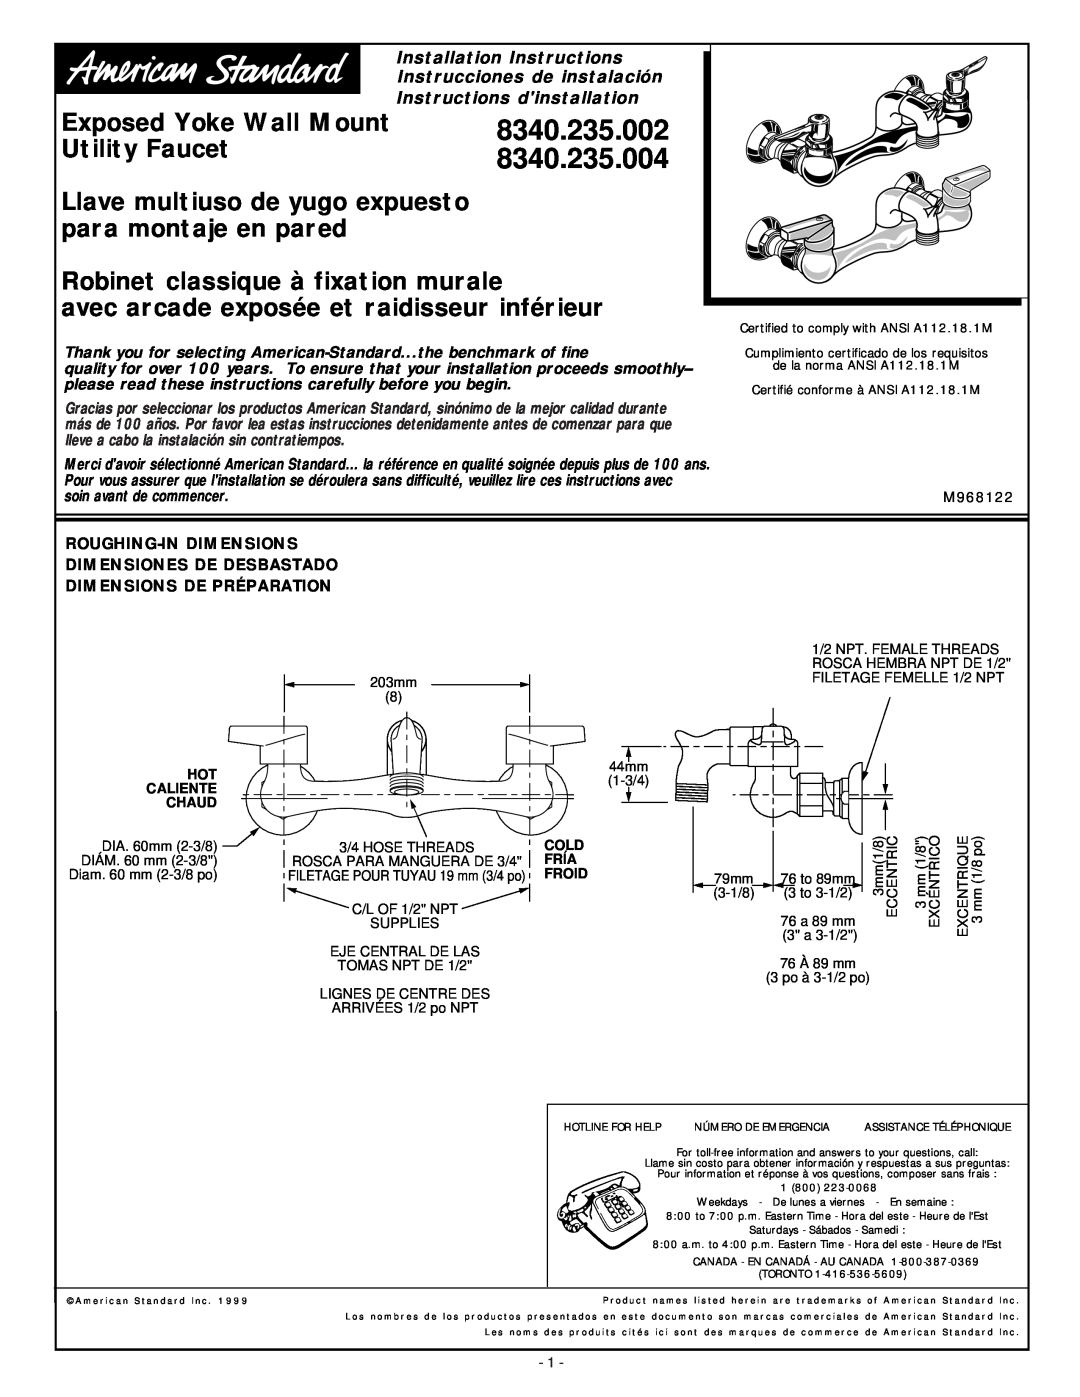 American Standard 8340.235.004 installation instructions 8340.235.002, Exposed Yoke Wall Mount, Utility Faucet 